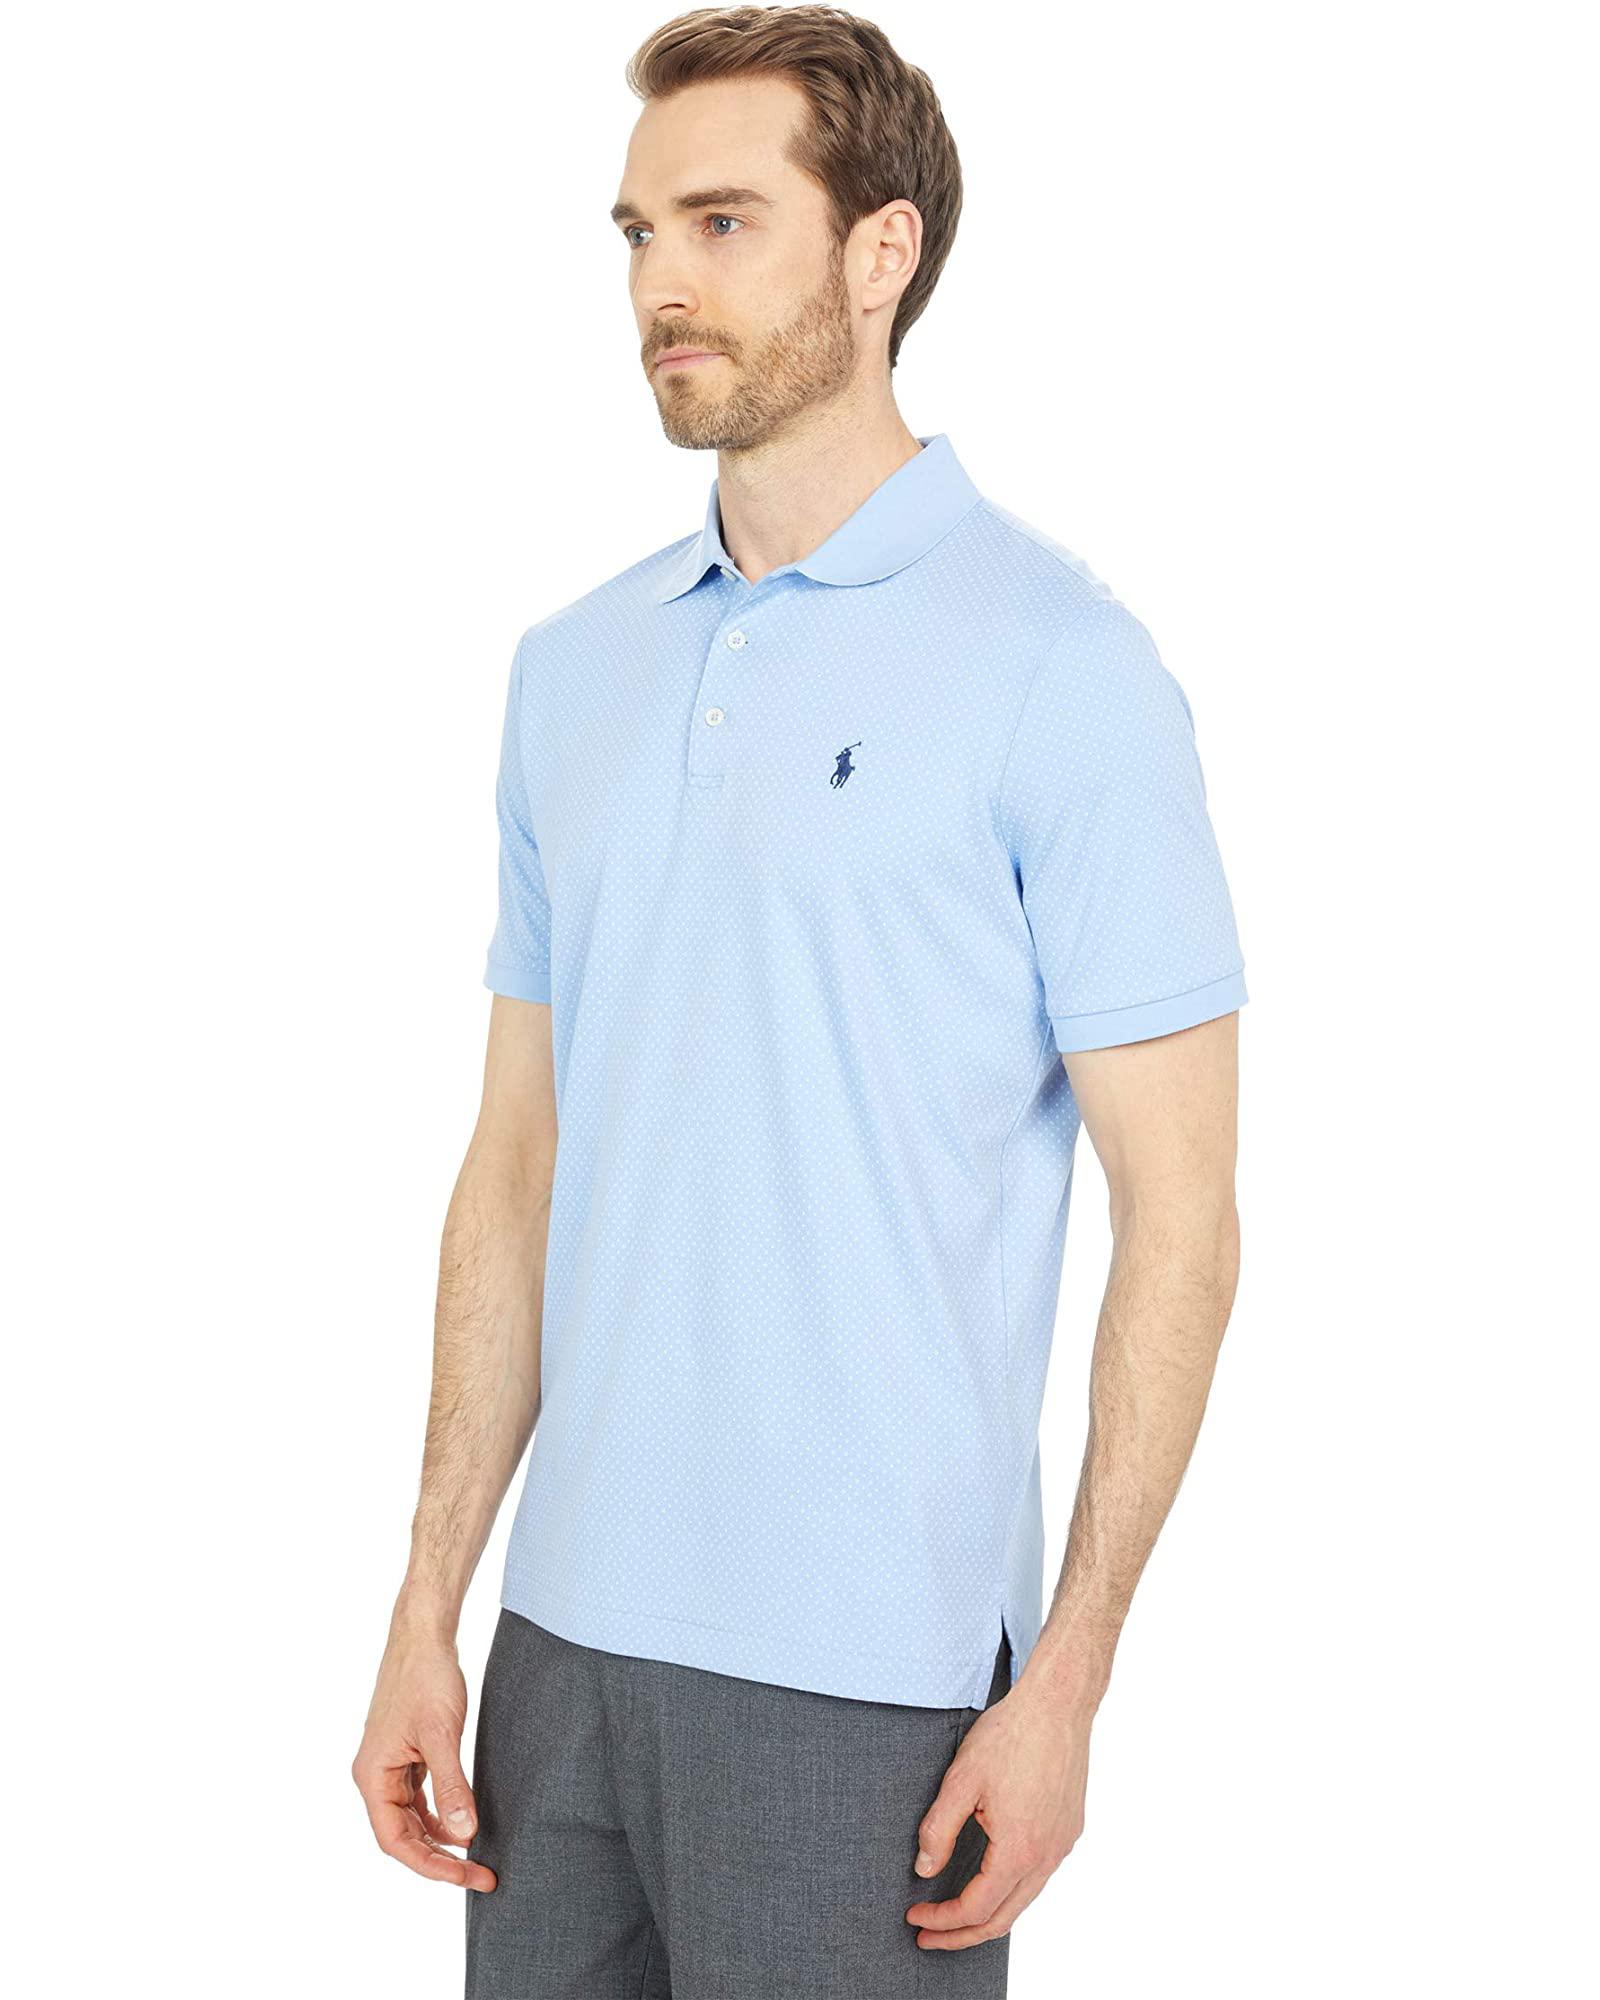 Men's ralph lauren polo shirts stand as an enduring emblem of timeless style and effortless sophistication.